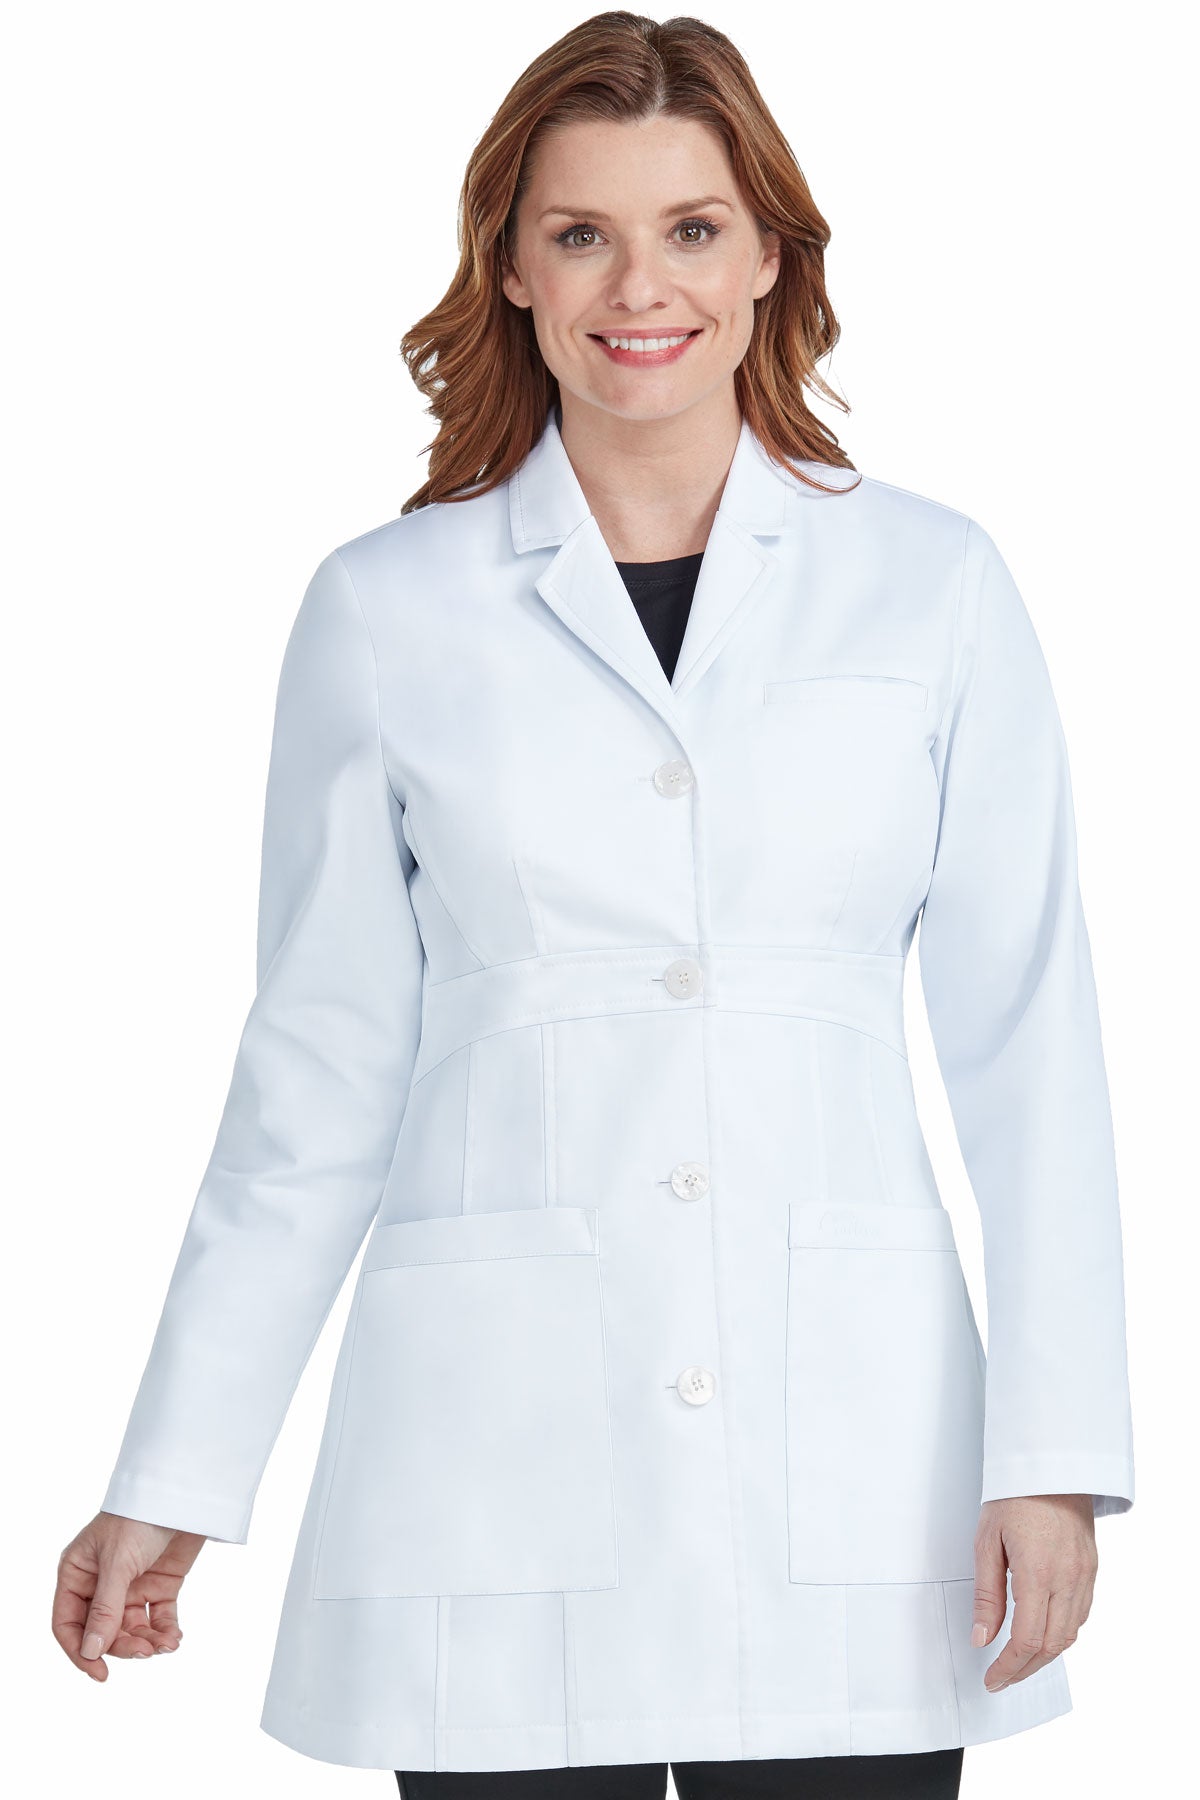 Med Couture fashion scrubs for women fit guide